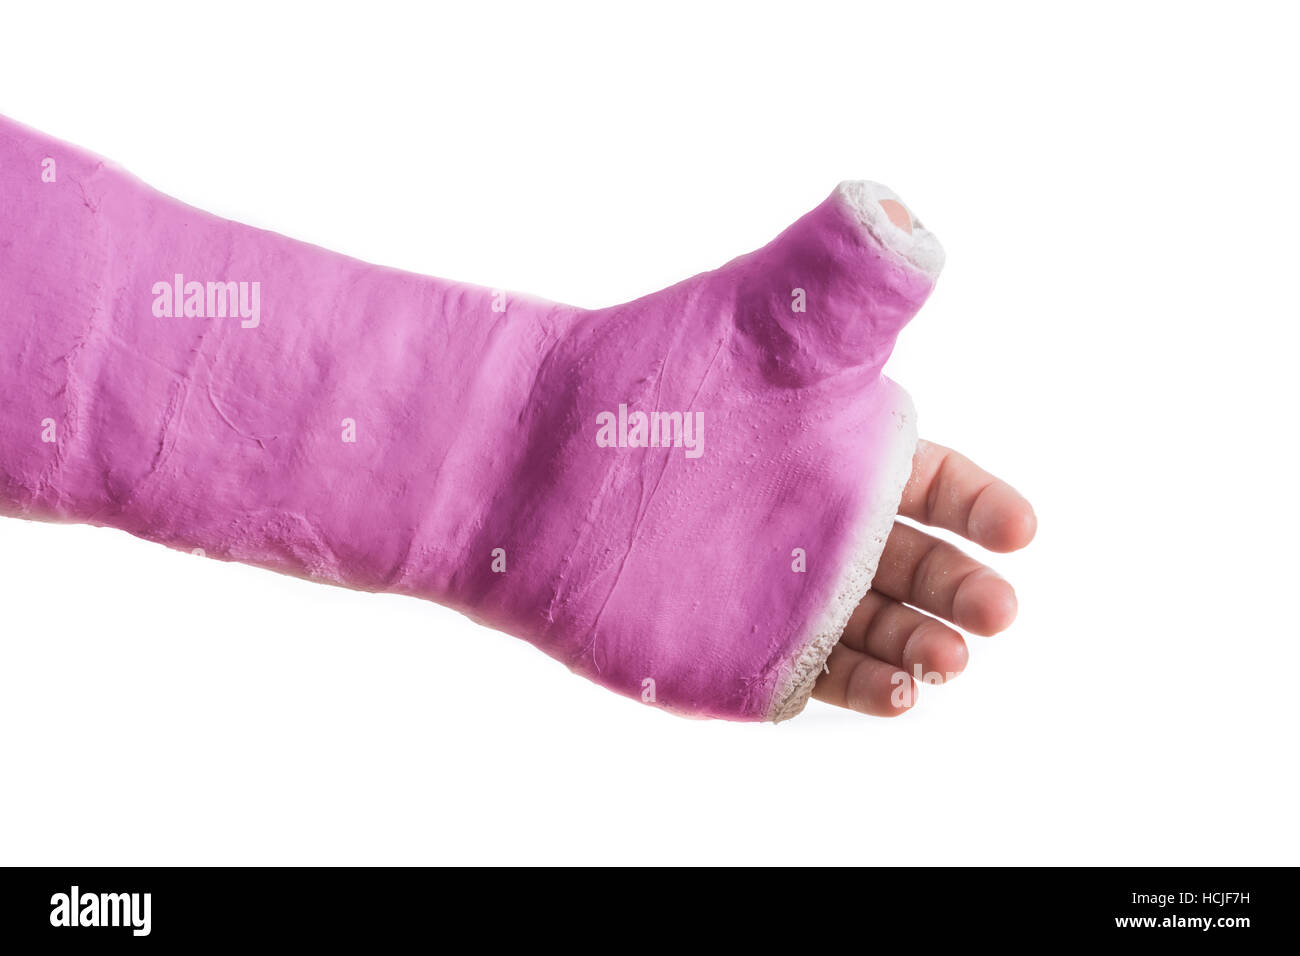 Close up of a pink arm plaster / fiberglass cast  with the thumb extended in a thumbs-up shape, isolated on white Stock Photo